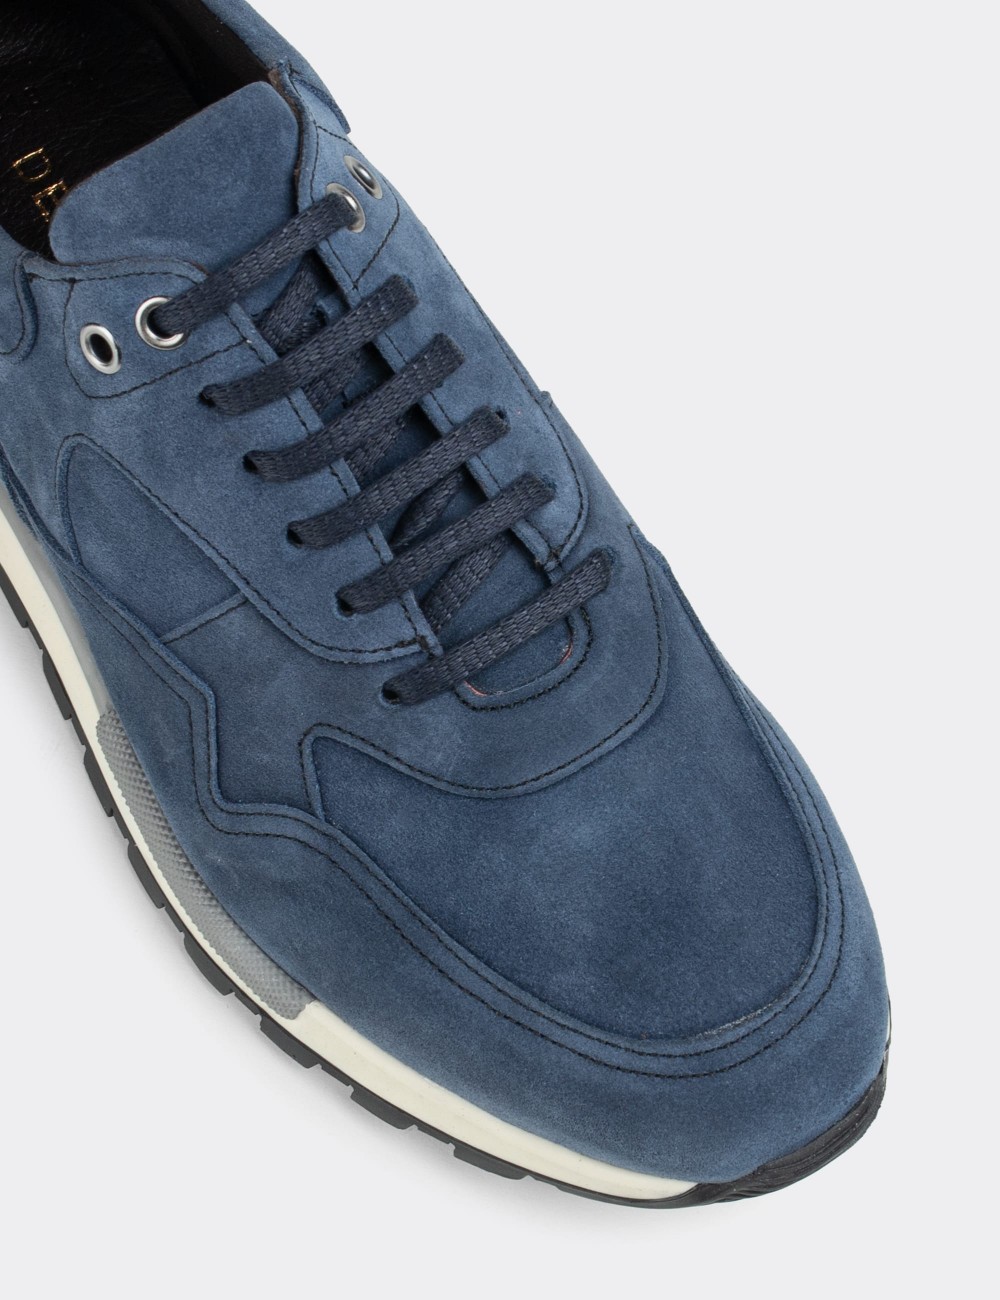 Blue Suede Leather Sneakers - 01818MMVIT01